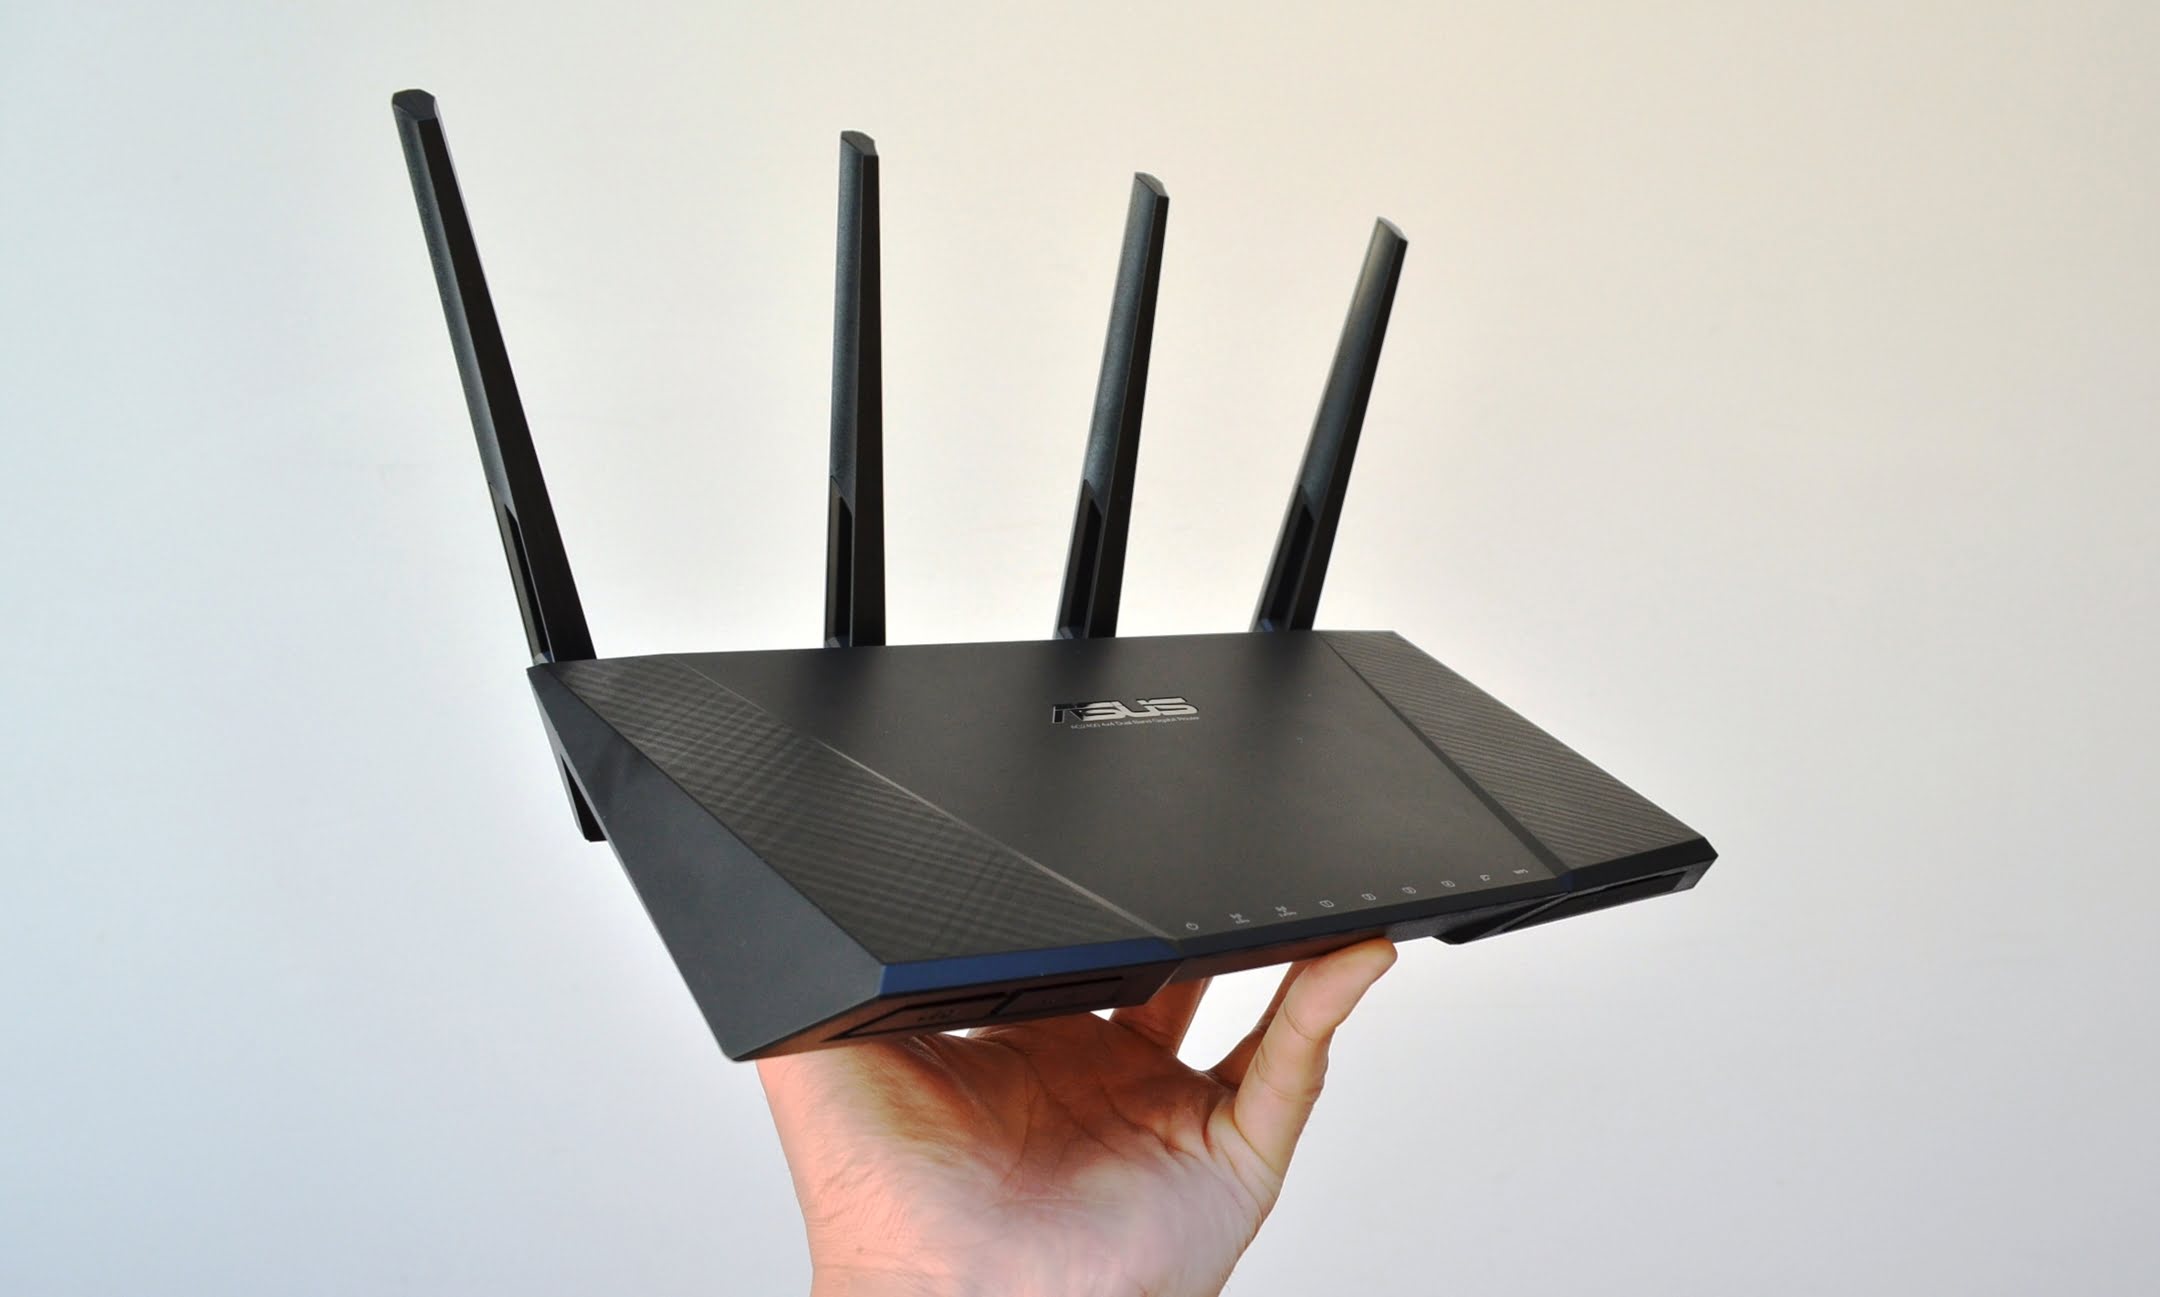 How To Update My Wi-Fi Router